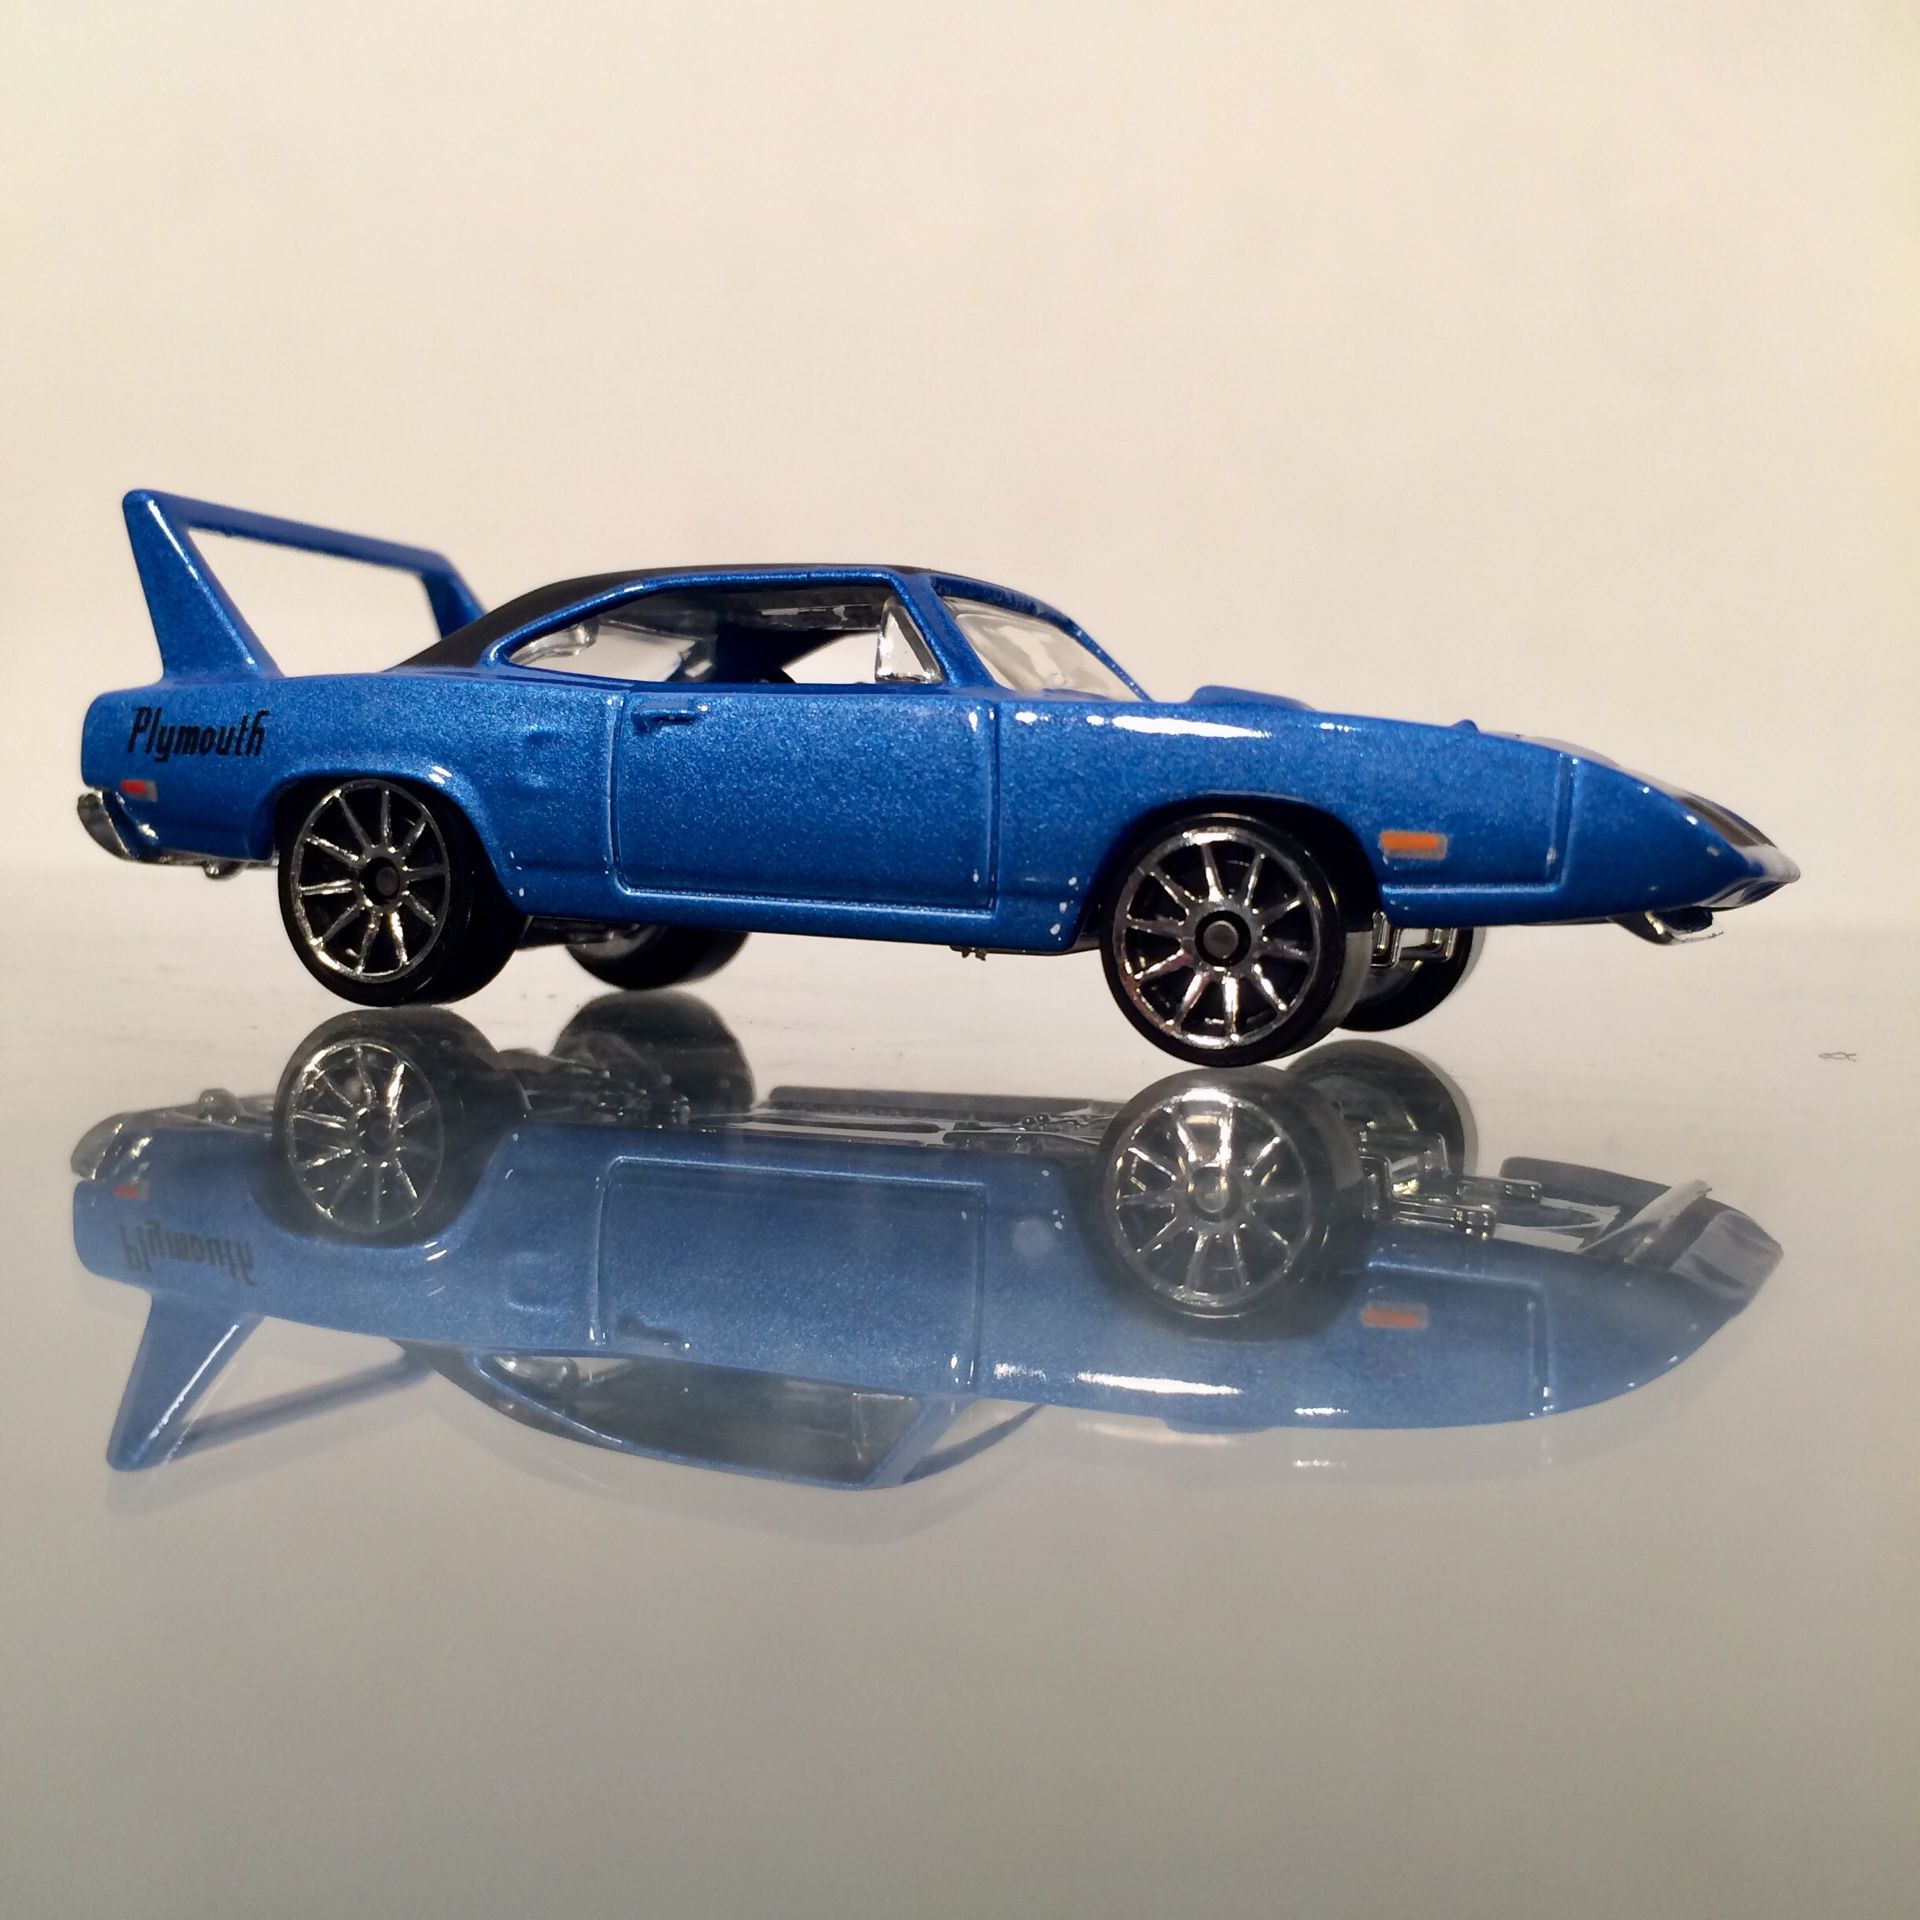 Hot Wheels 10 Spoke 1970 Plymouth Superbird • 2006 First Editions 1 of 38